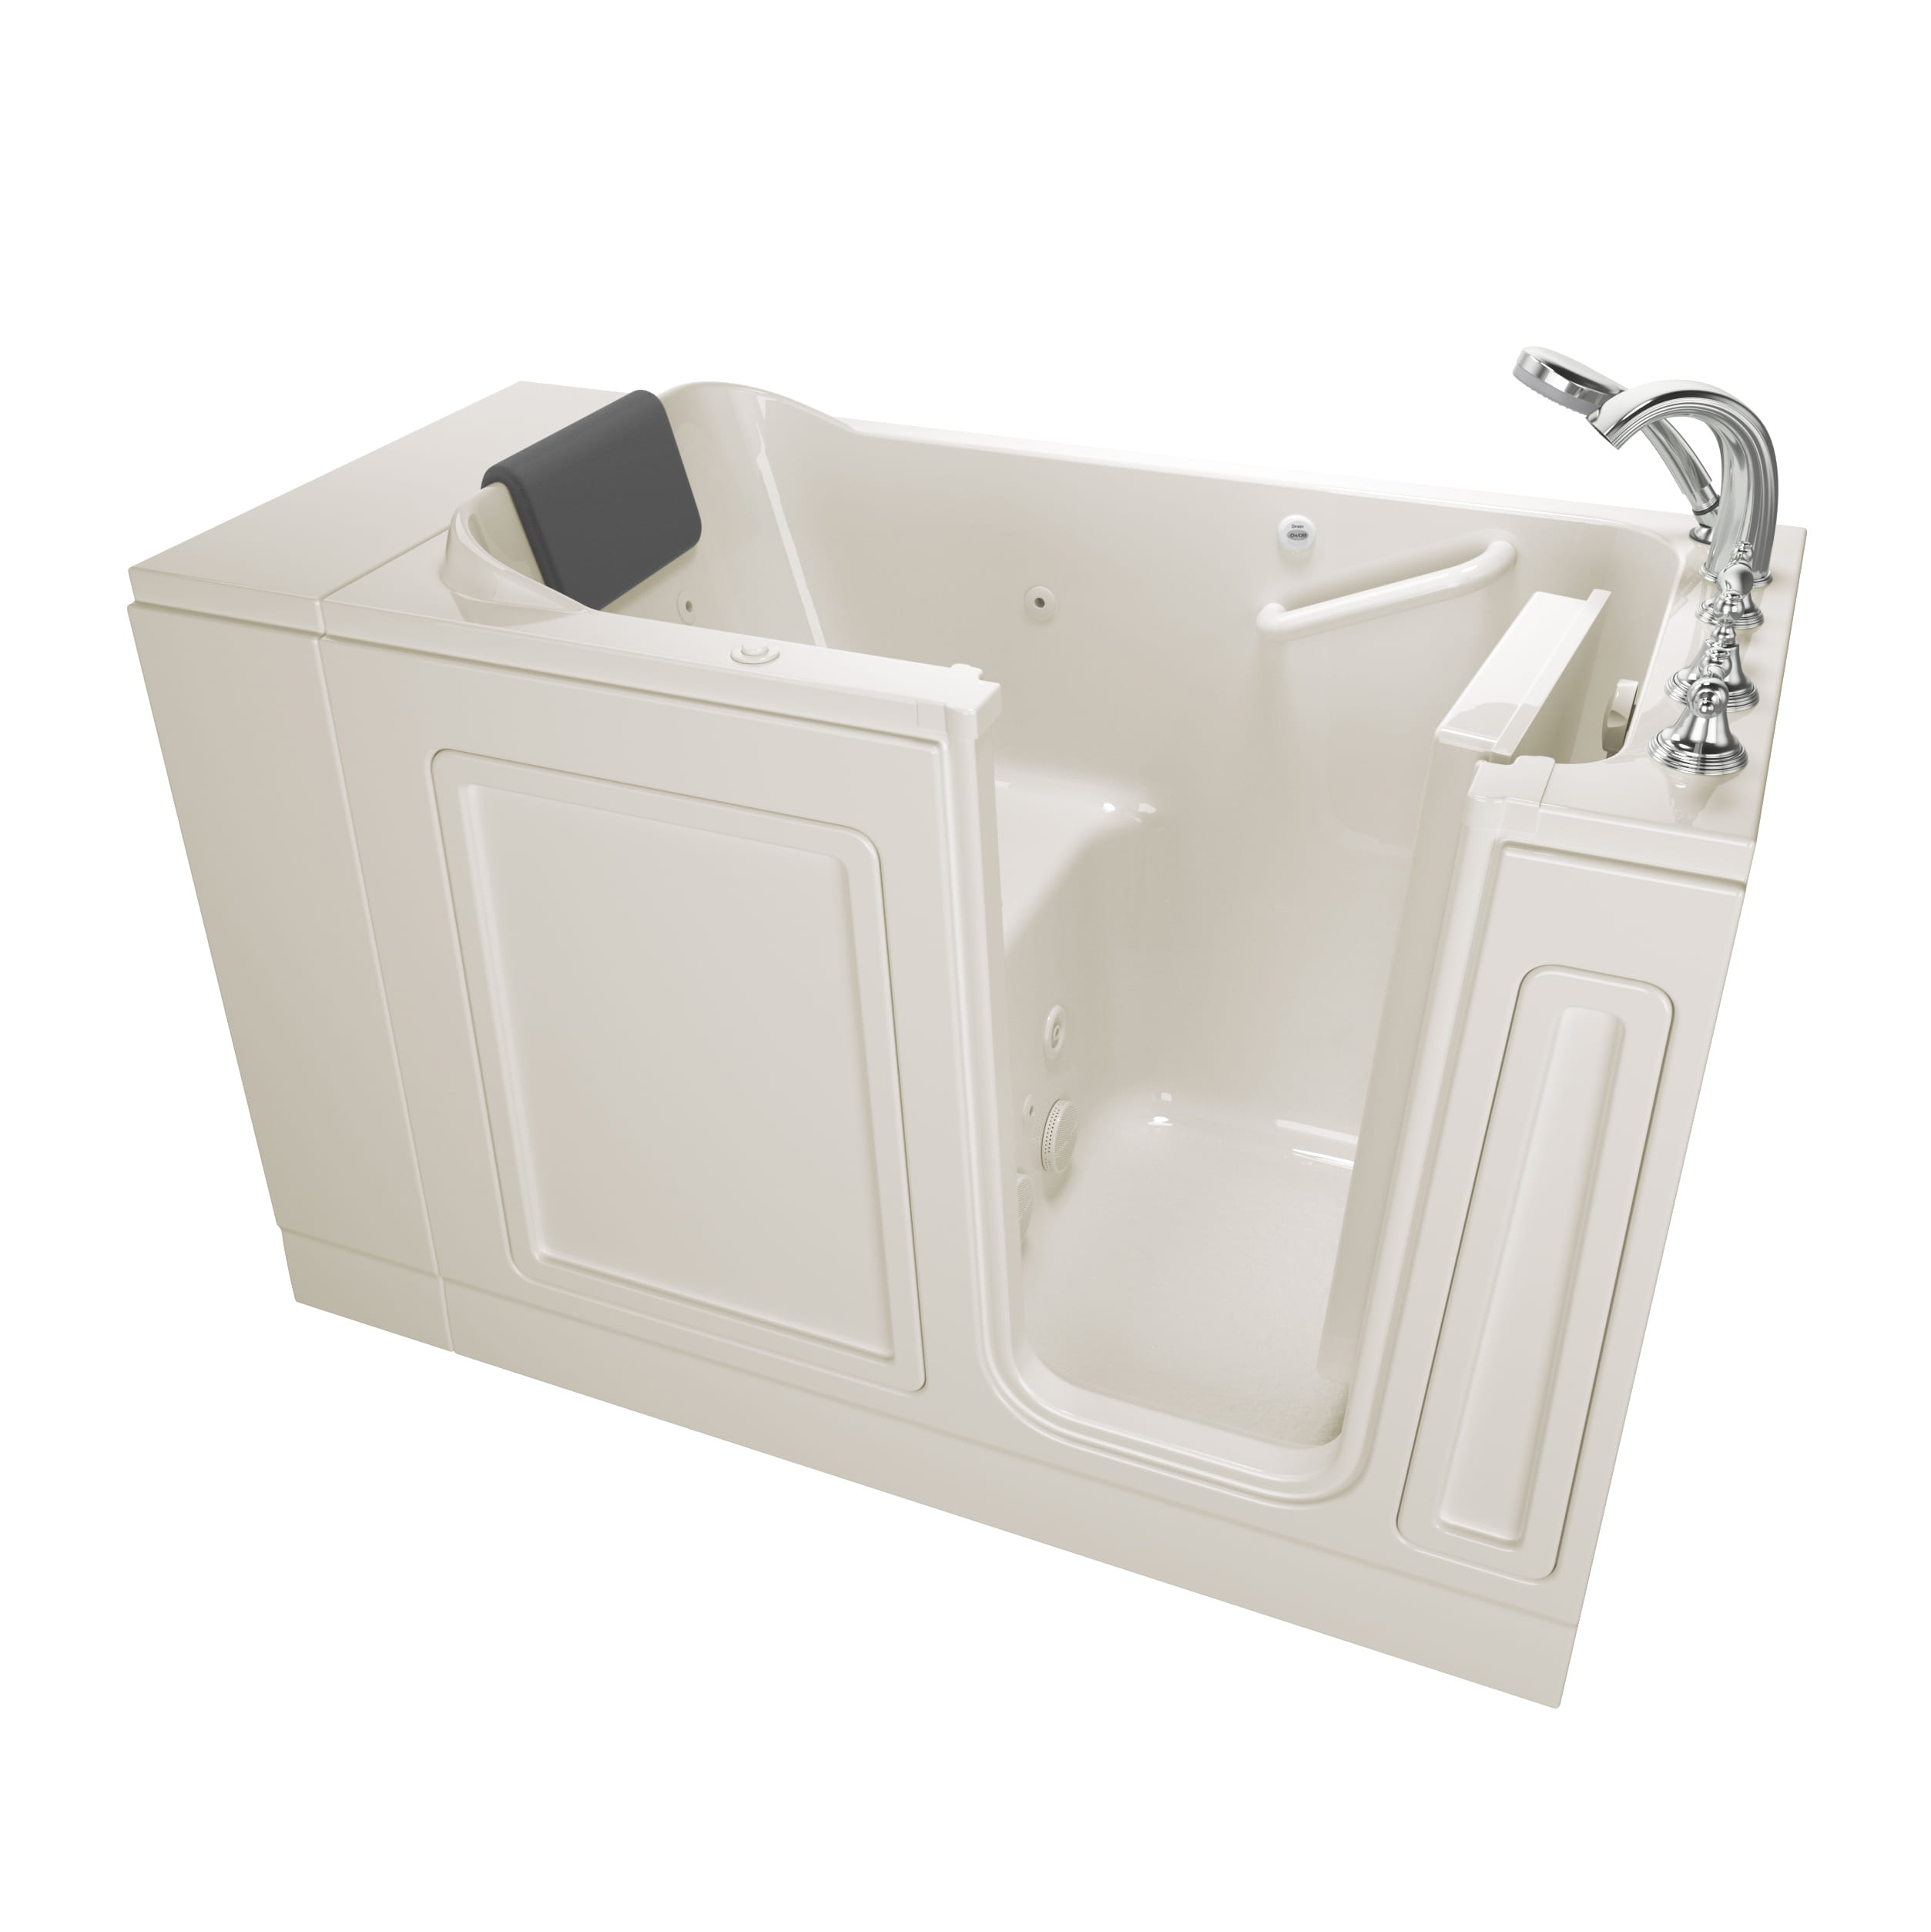 Acrylic Luxury Series 28 x 48 Inch Walk in Tub With Whirlpool System   Right Hand Drain With Faucet WIB LINEN